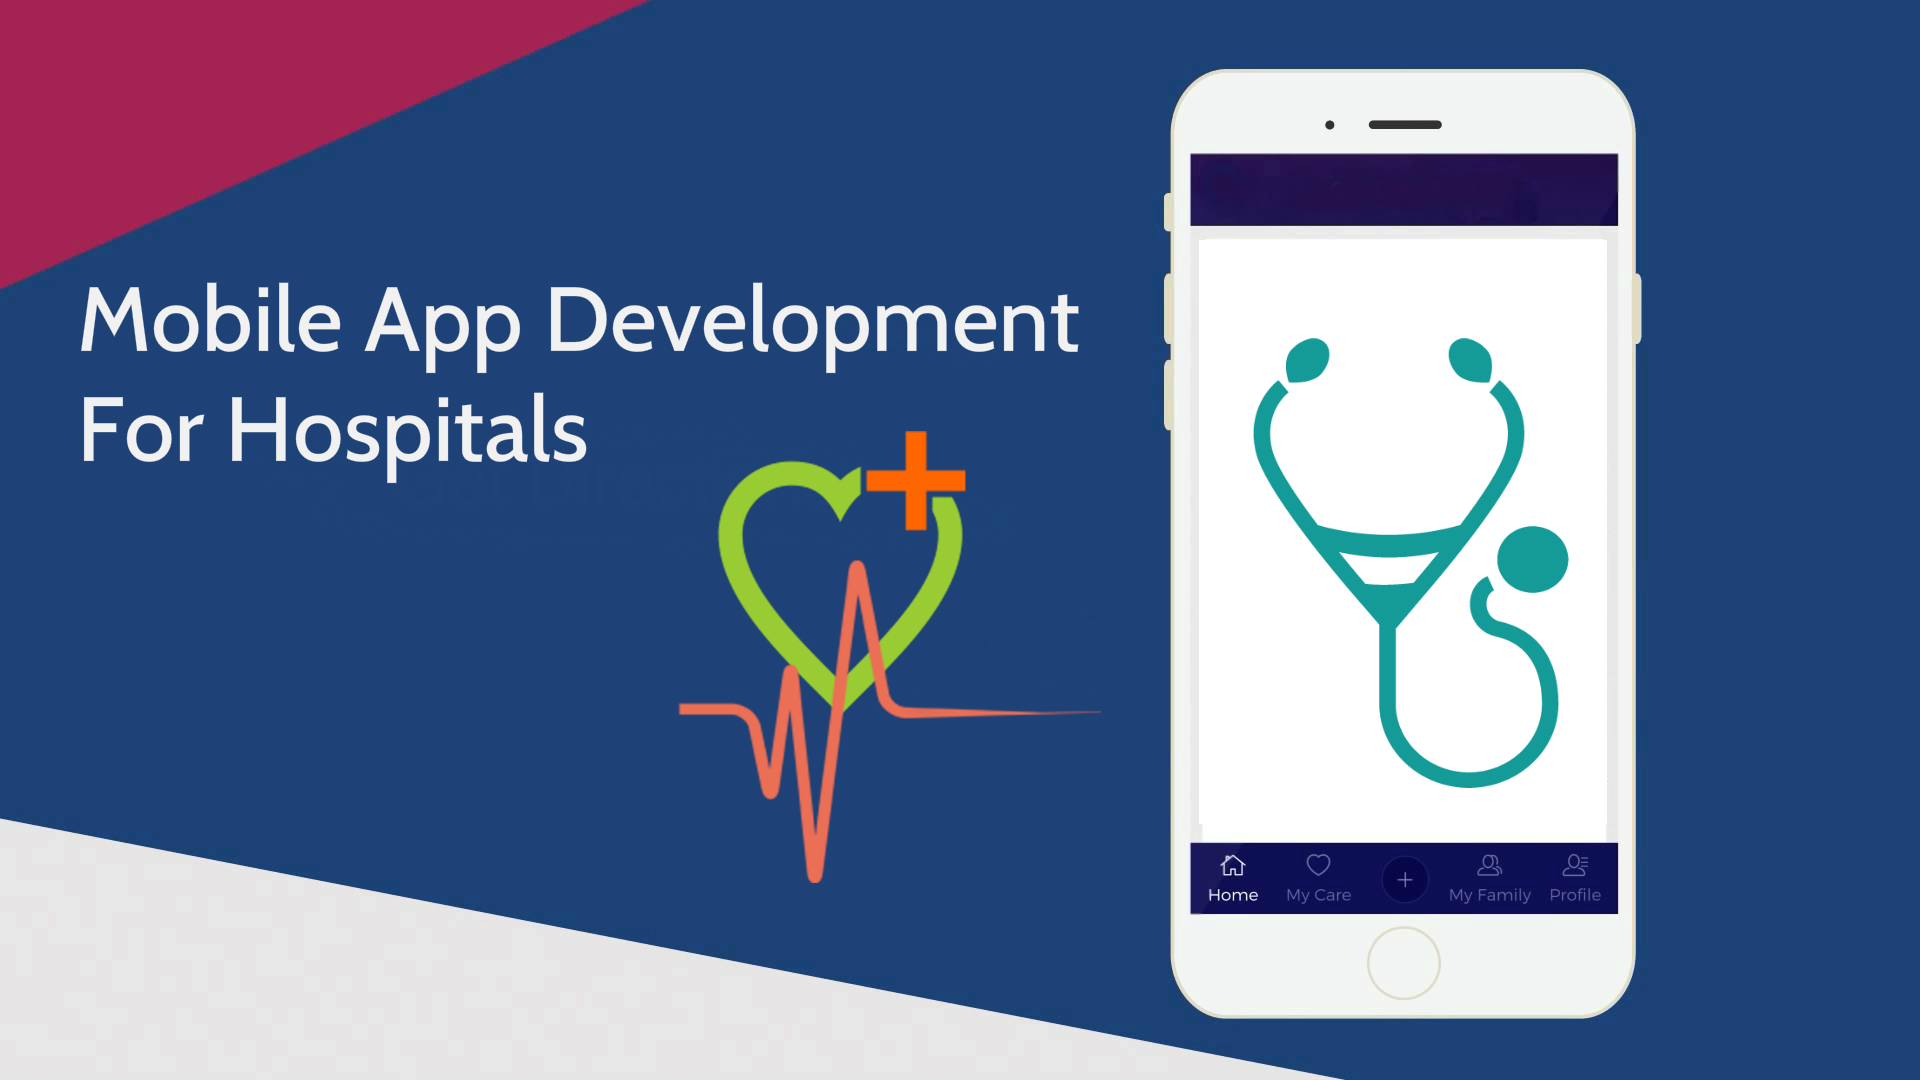 Top 5 Features That Hospitals Should include In The Mobile App